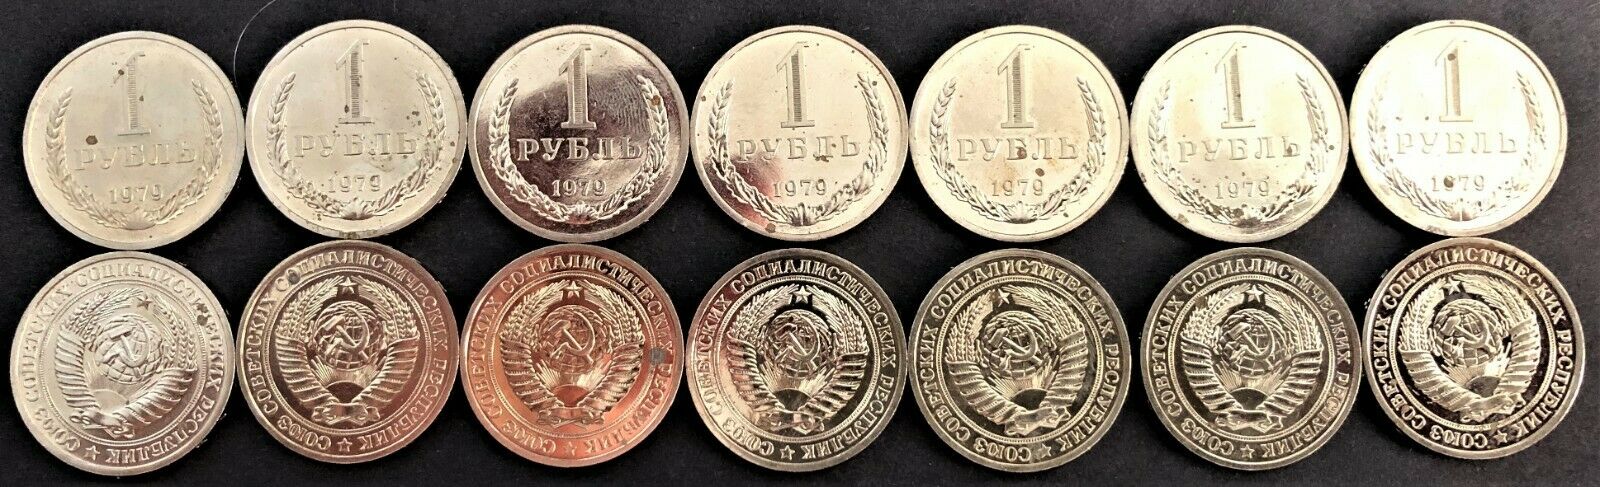 10 USSR RUSSIA 1 ROUBLE PROOF-LIKE COINS of 1979 KM 134a.2 EDGE LETTERING & DATE